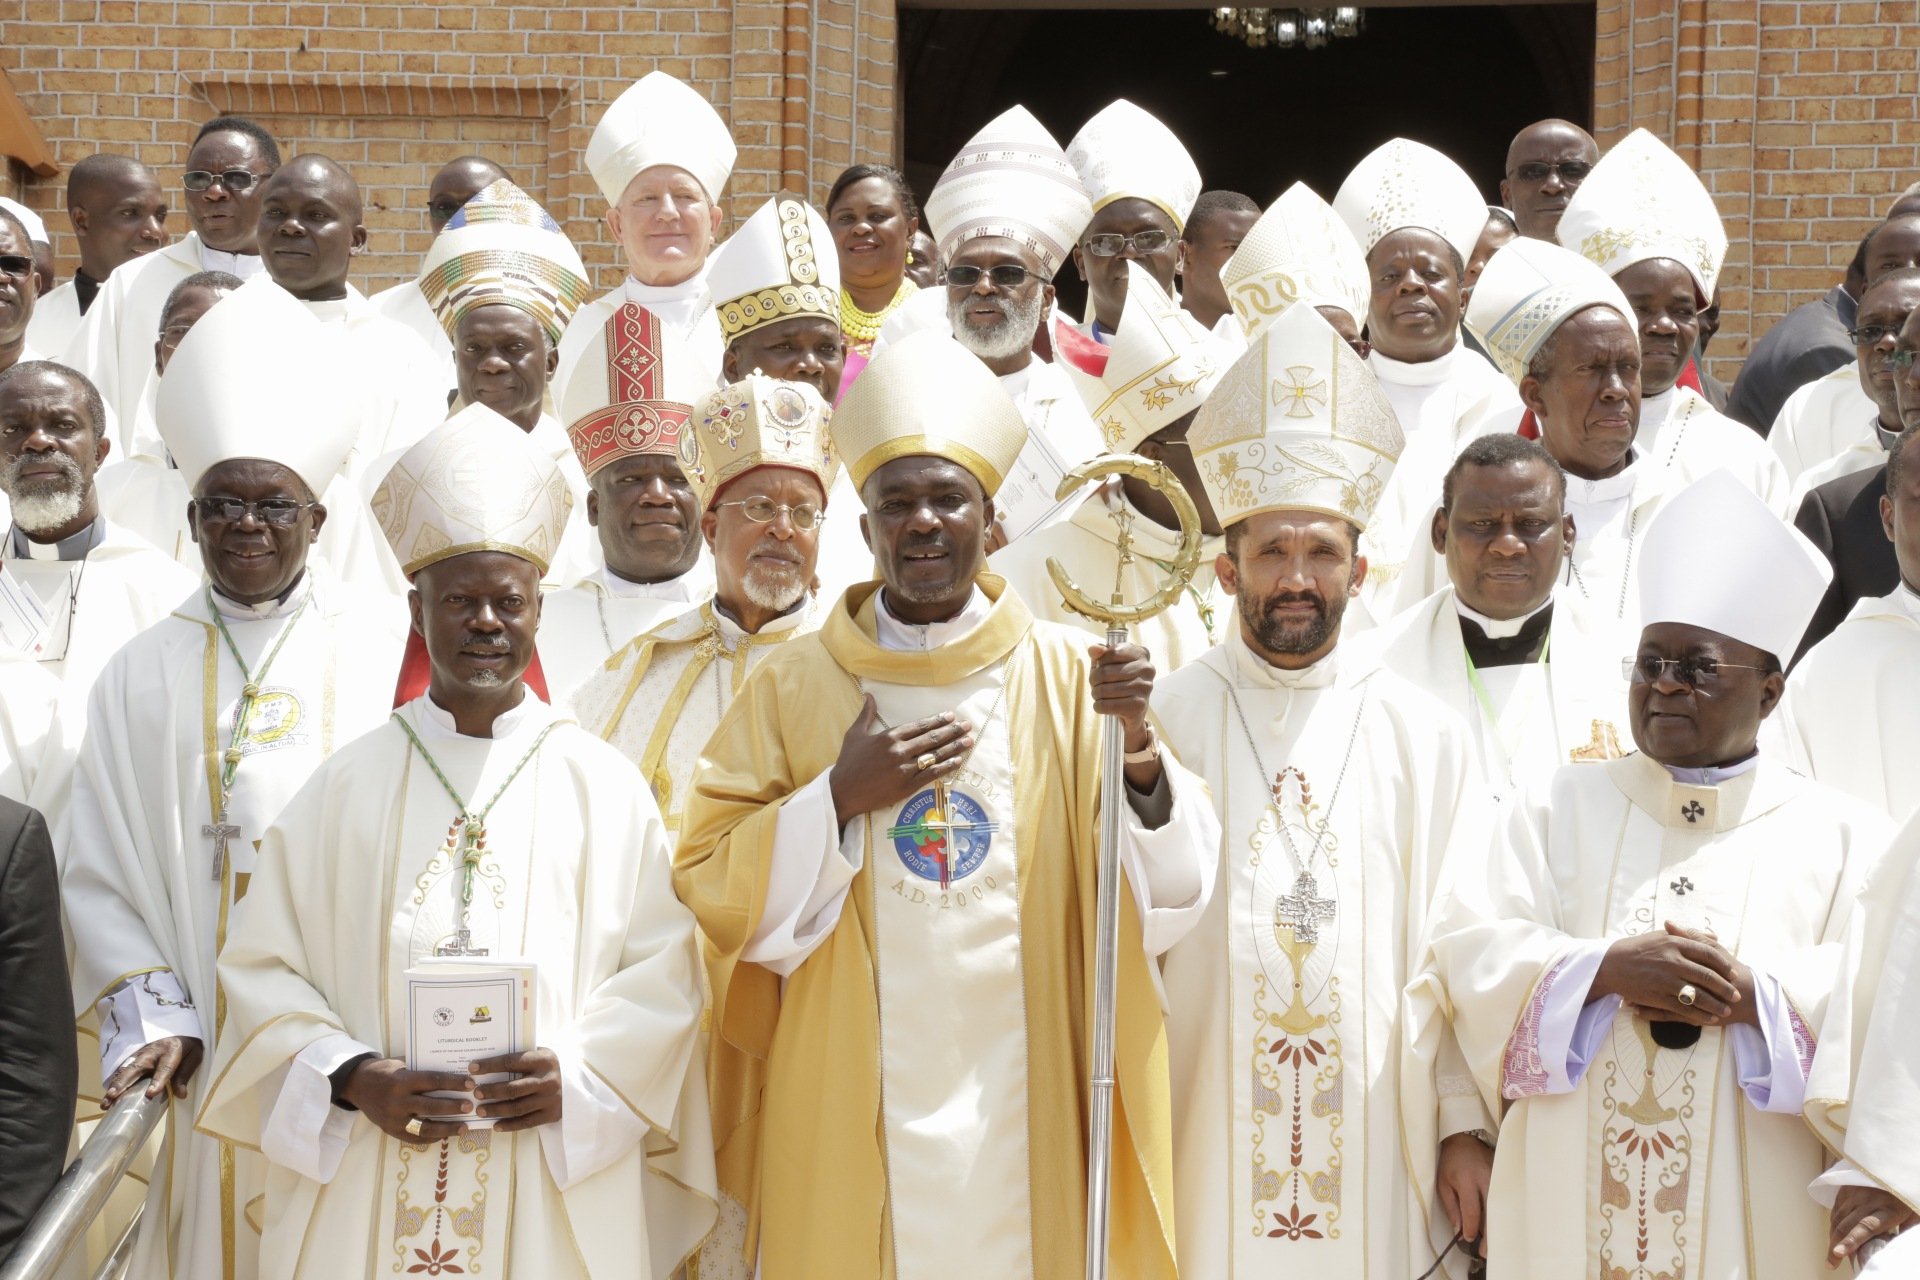 The Symposium of Episcopal Conferences of Africa and Madagascar (SECAM), born in 1969 is the Episcopal Conference of all African Catholic Bishops.